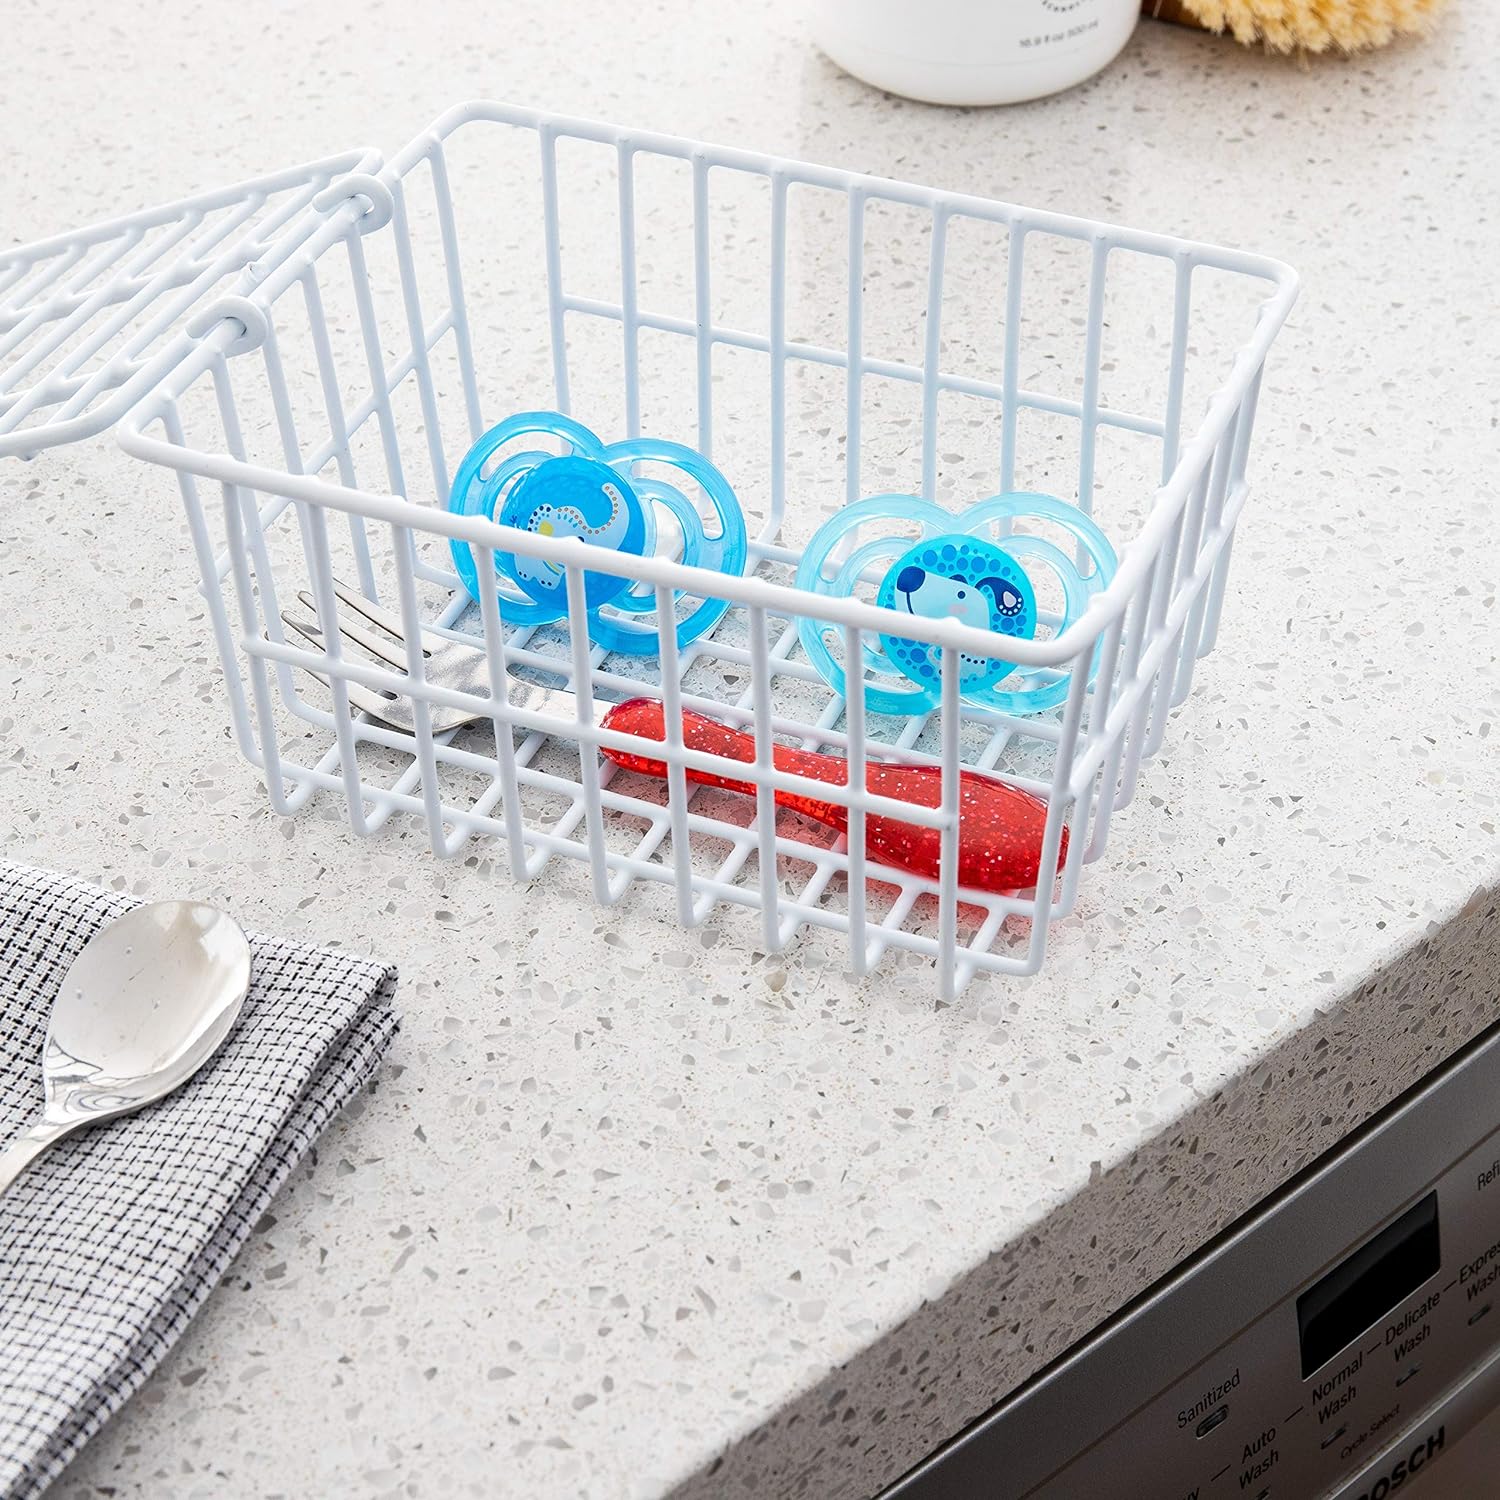 High Capacity Dishwasher Basket for Small Items & Accessories